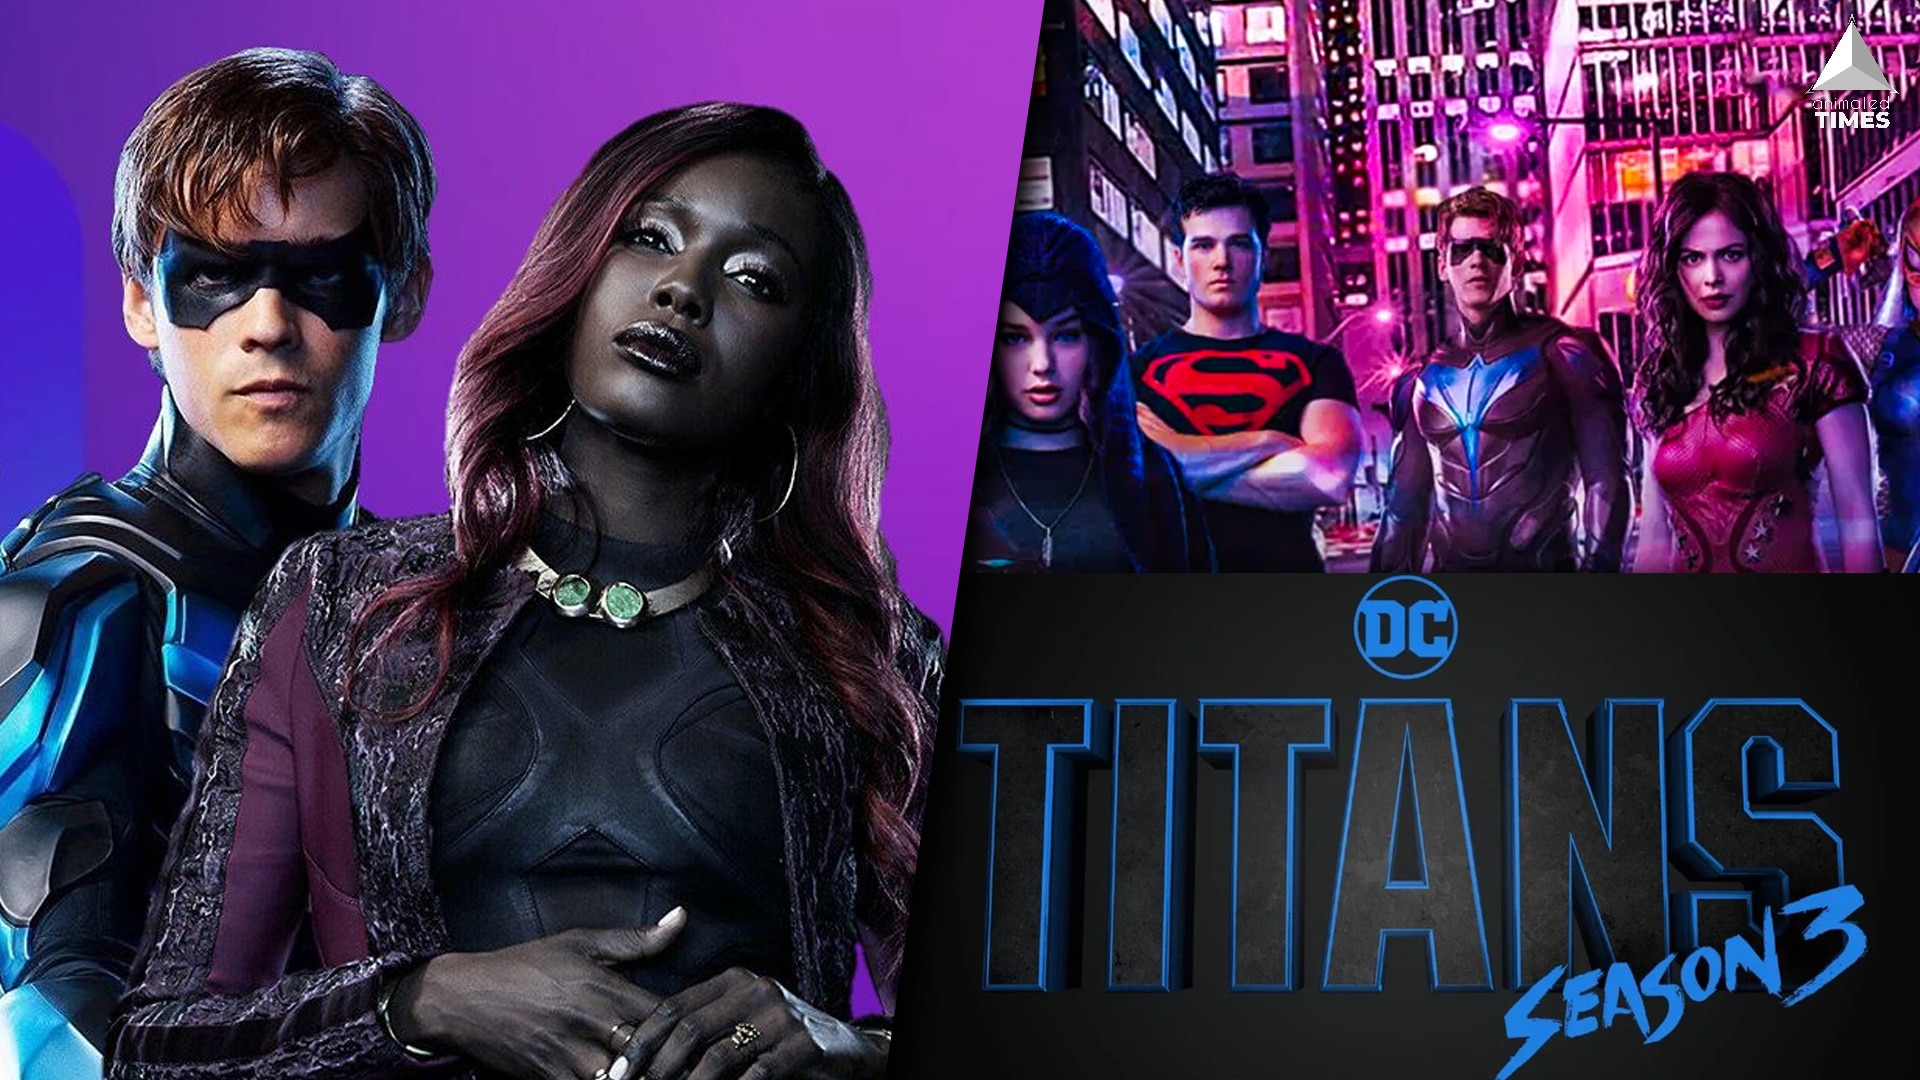 Titans HBO Max Shows First Ten Episode Titles LEAKED 1